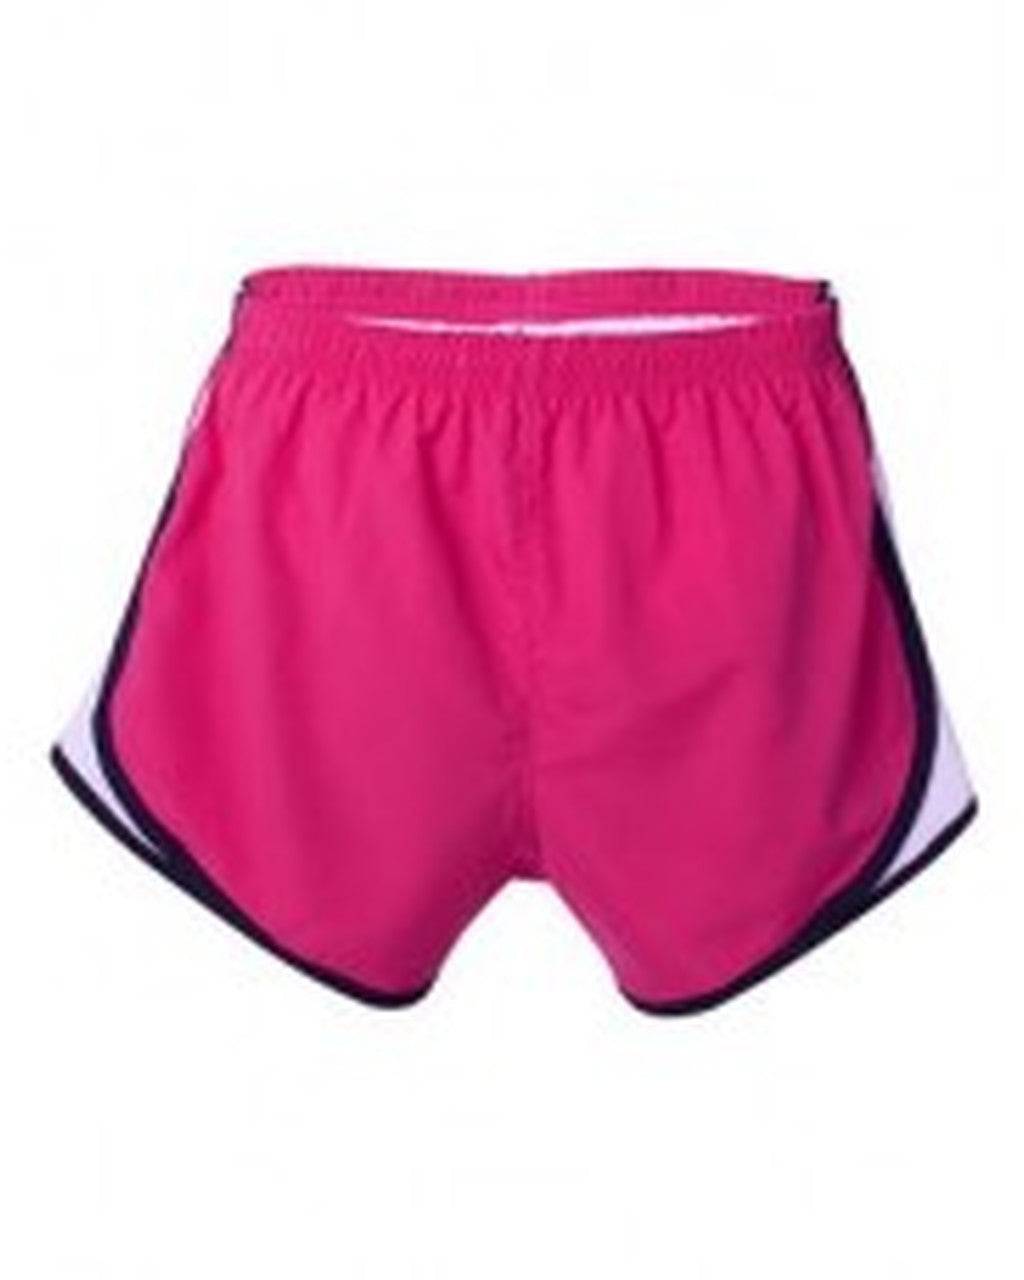 Sorority Apparel - Hot Pink/Black/White Embroidered Velocity Running Shorts